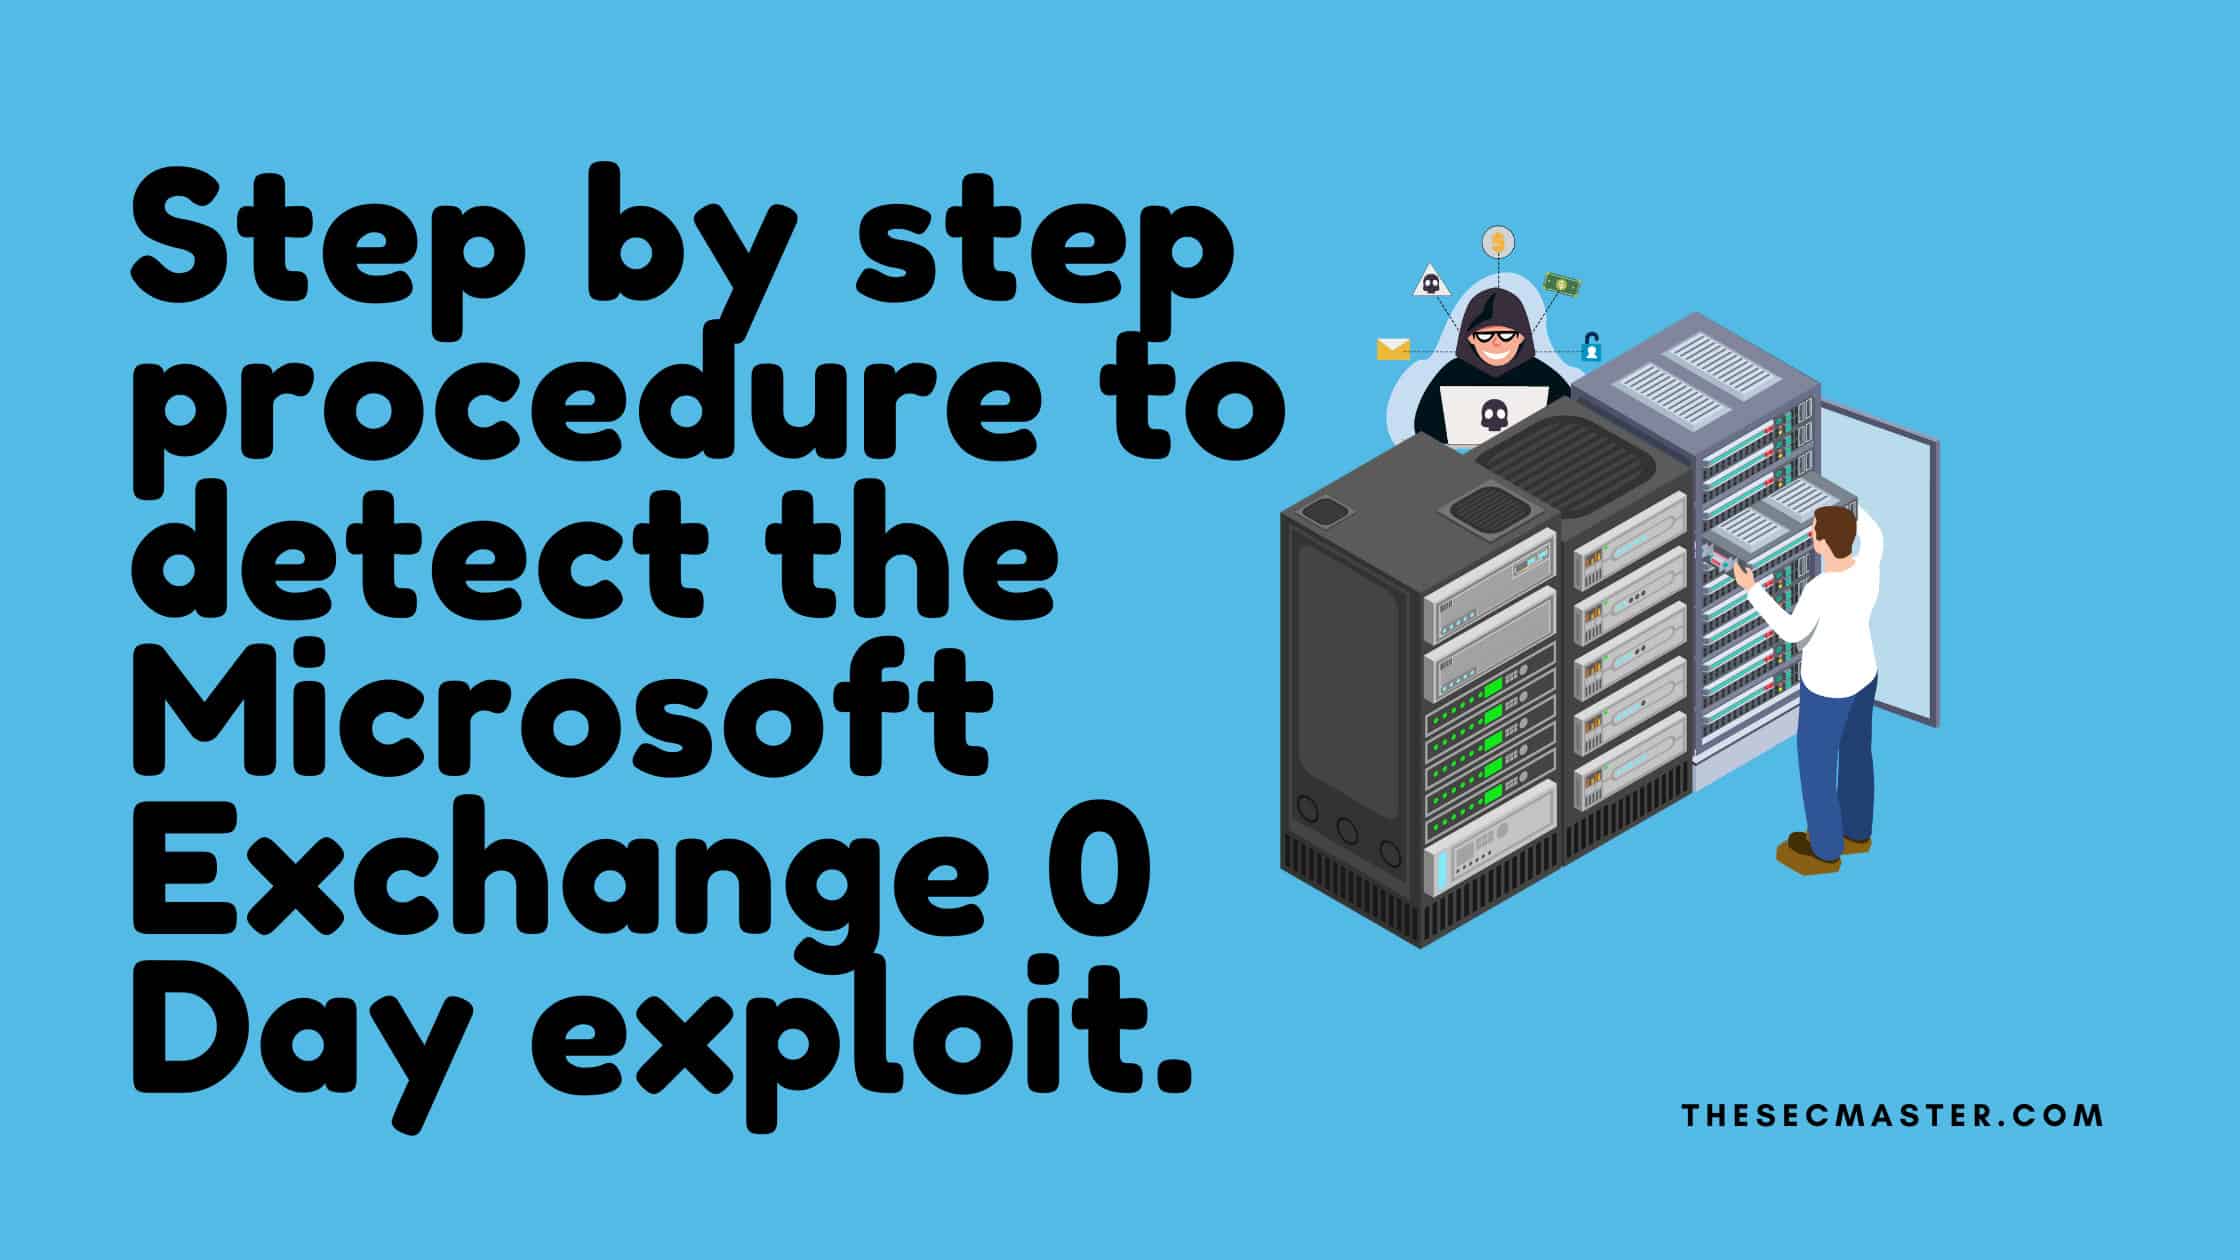 Step By Step Procedure To Detect The Microsoft Exchange 0 Day Exploit